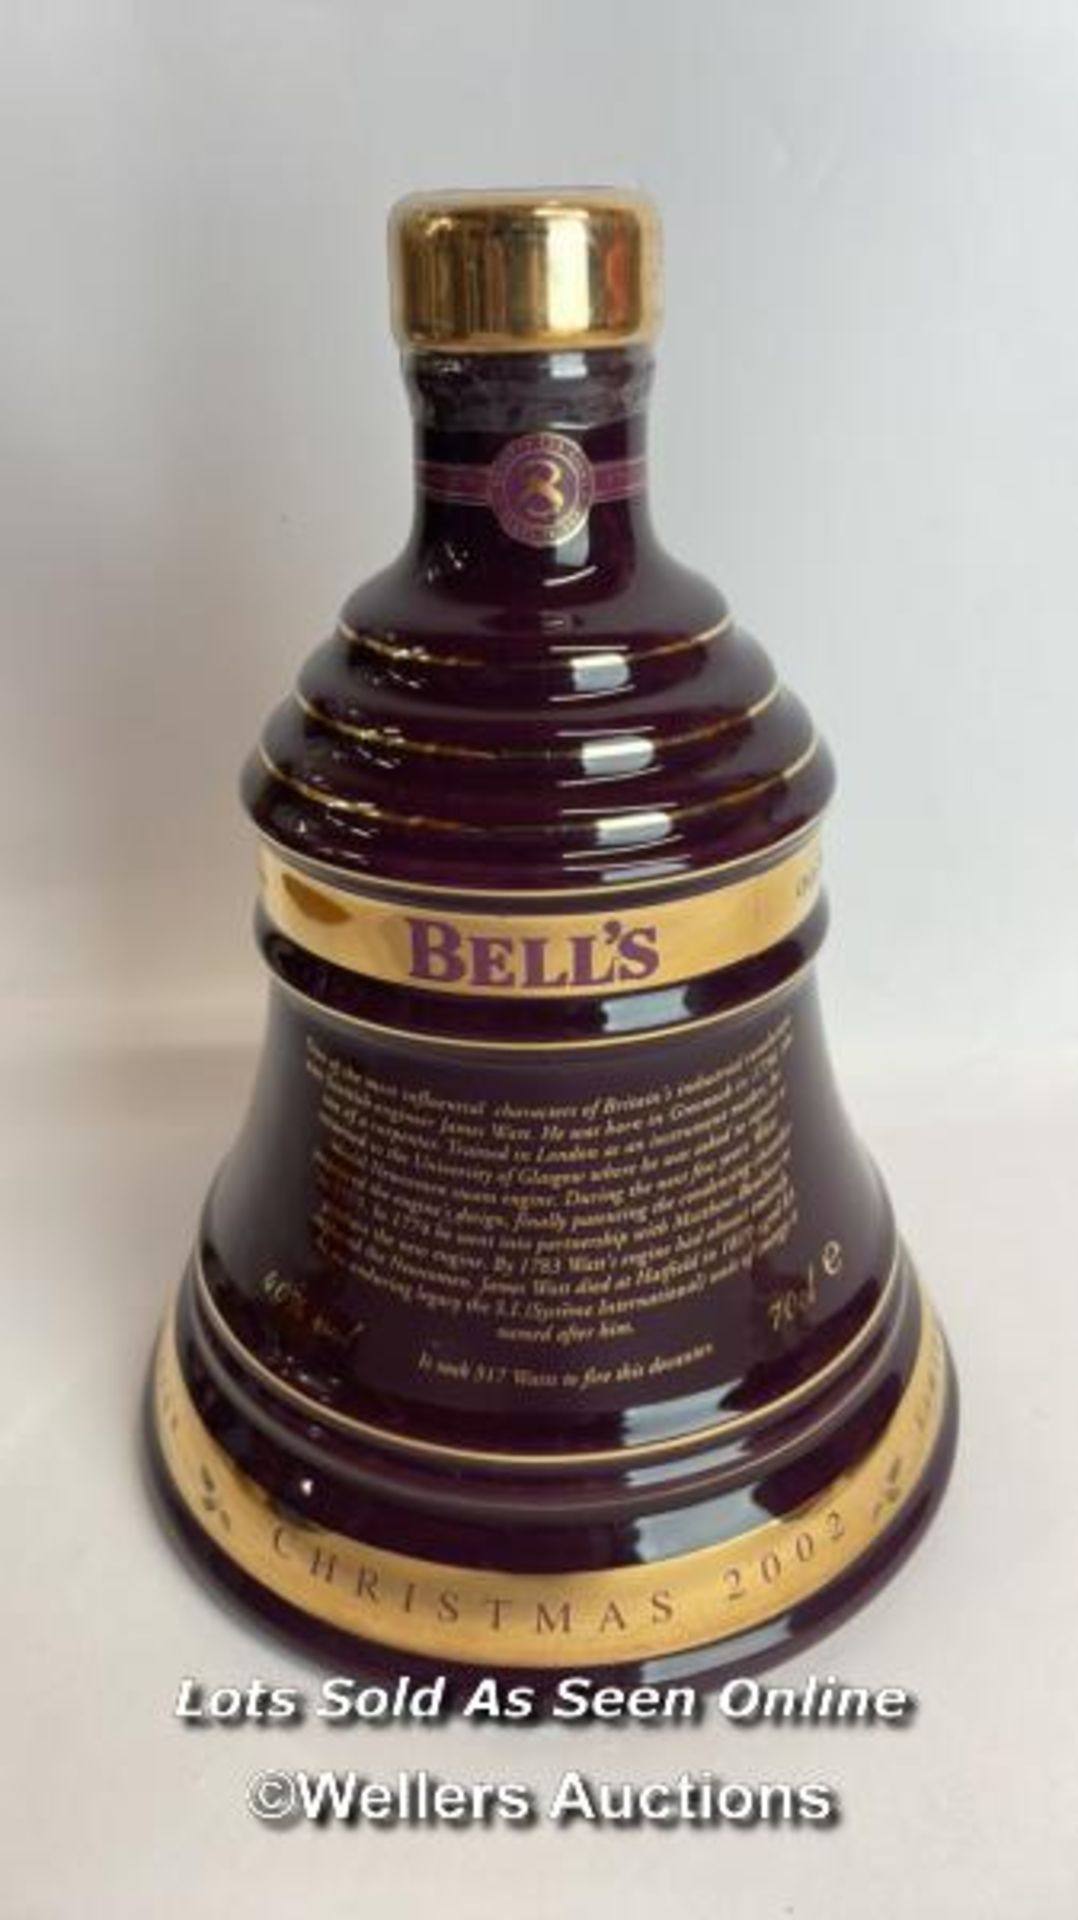 Bell's 2002 Old Scotch Whisky Limited Edition Christmas Decanter, Aged 8 Years, Brand New and Boxed, - Image 5 of 8